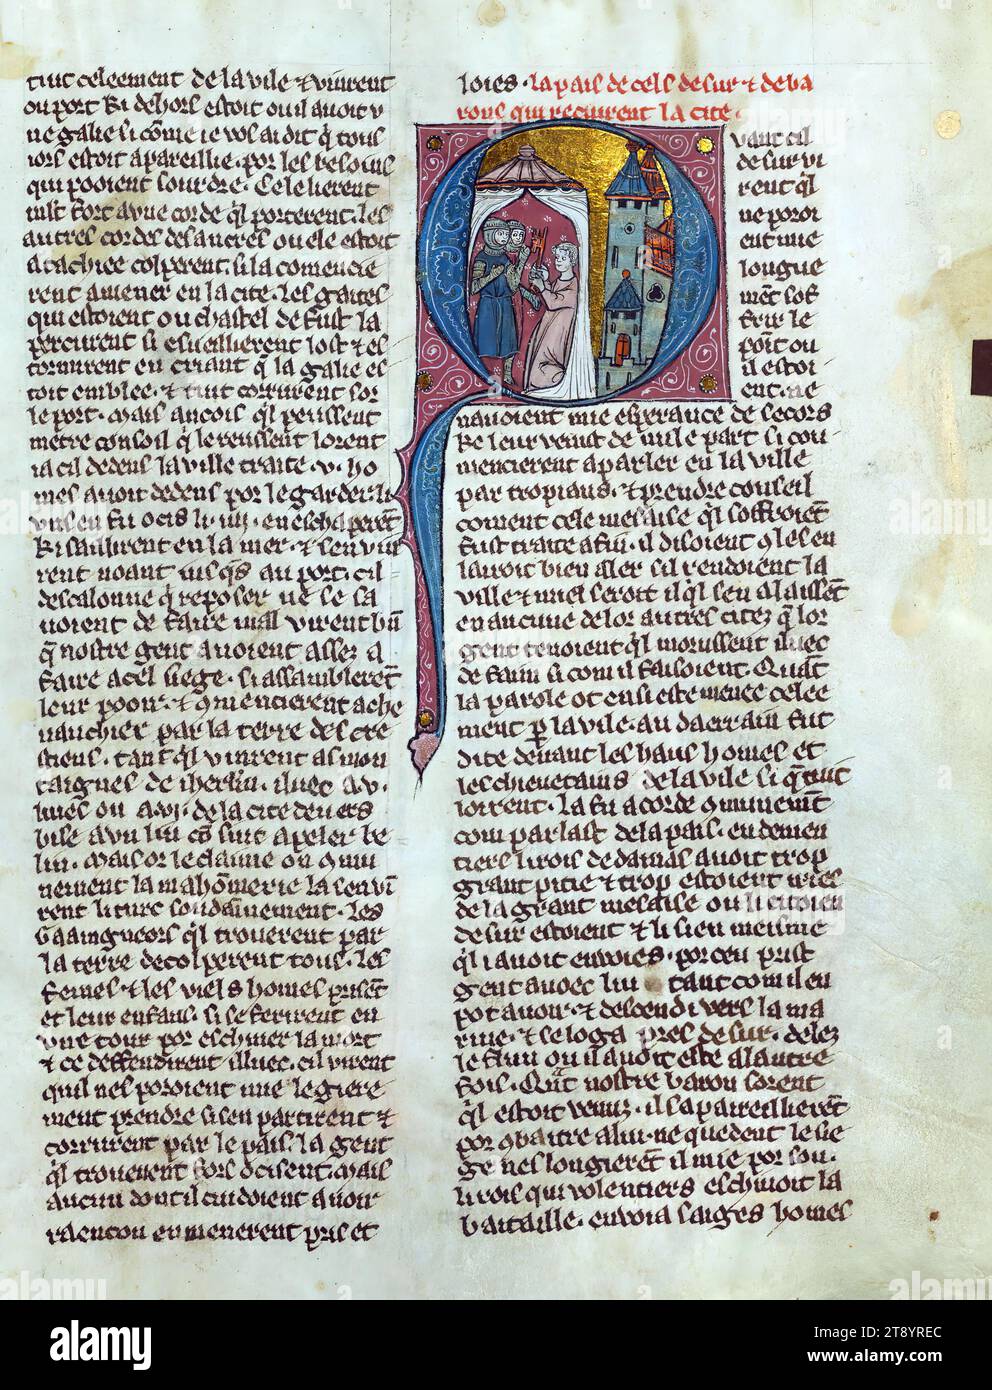 William of Tyre's Histoire d'Outre Mer, Initial 'Q' with man handing knights in tent the key to the city of Tyre, This manuscript, completed in the later part of the thirteenth century, contains William of Tyre's Estoire d'Eracles (to 1229), Les Faits des Romains (continuation, Tiberius to Julian), and a letter of Prester John. While the origin of the manuscript is debatable between Acre and Paris, Jaroslav Folda suggests a strong connection with Epinal 45, a manuscript known to have been created in Paris during this same time Stock Photo